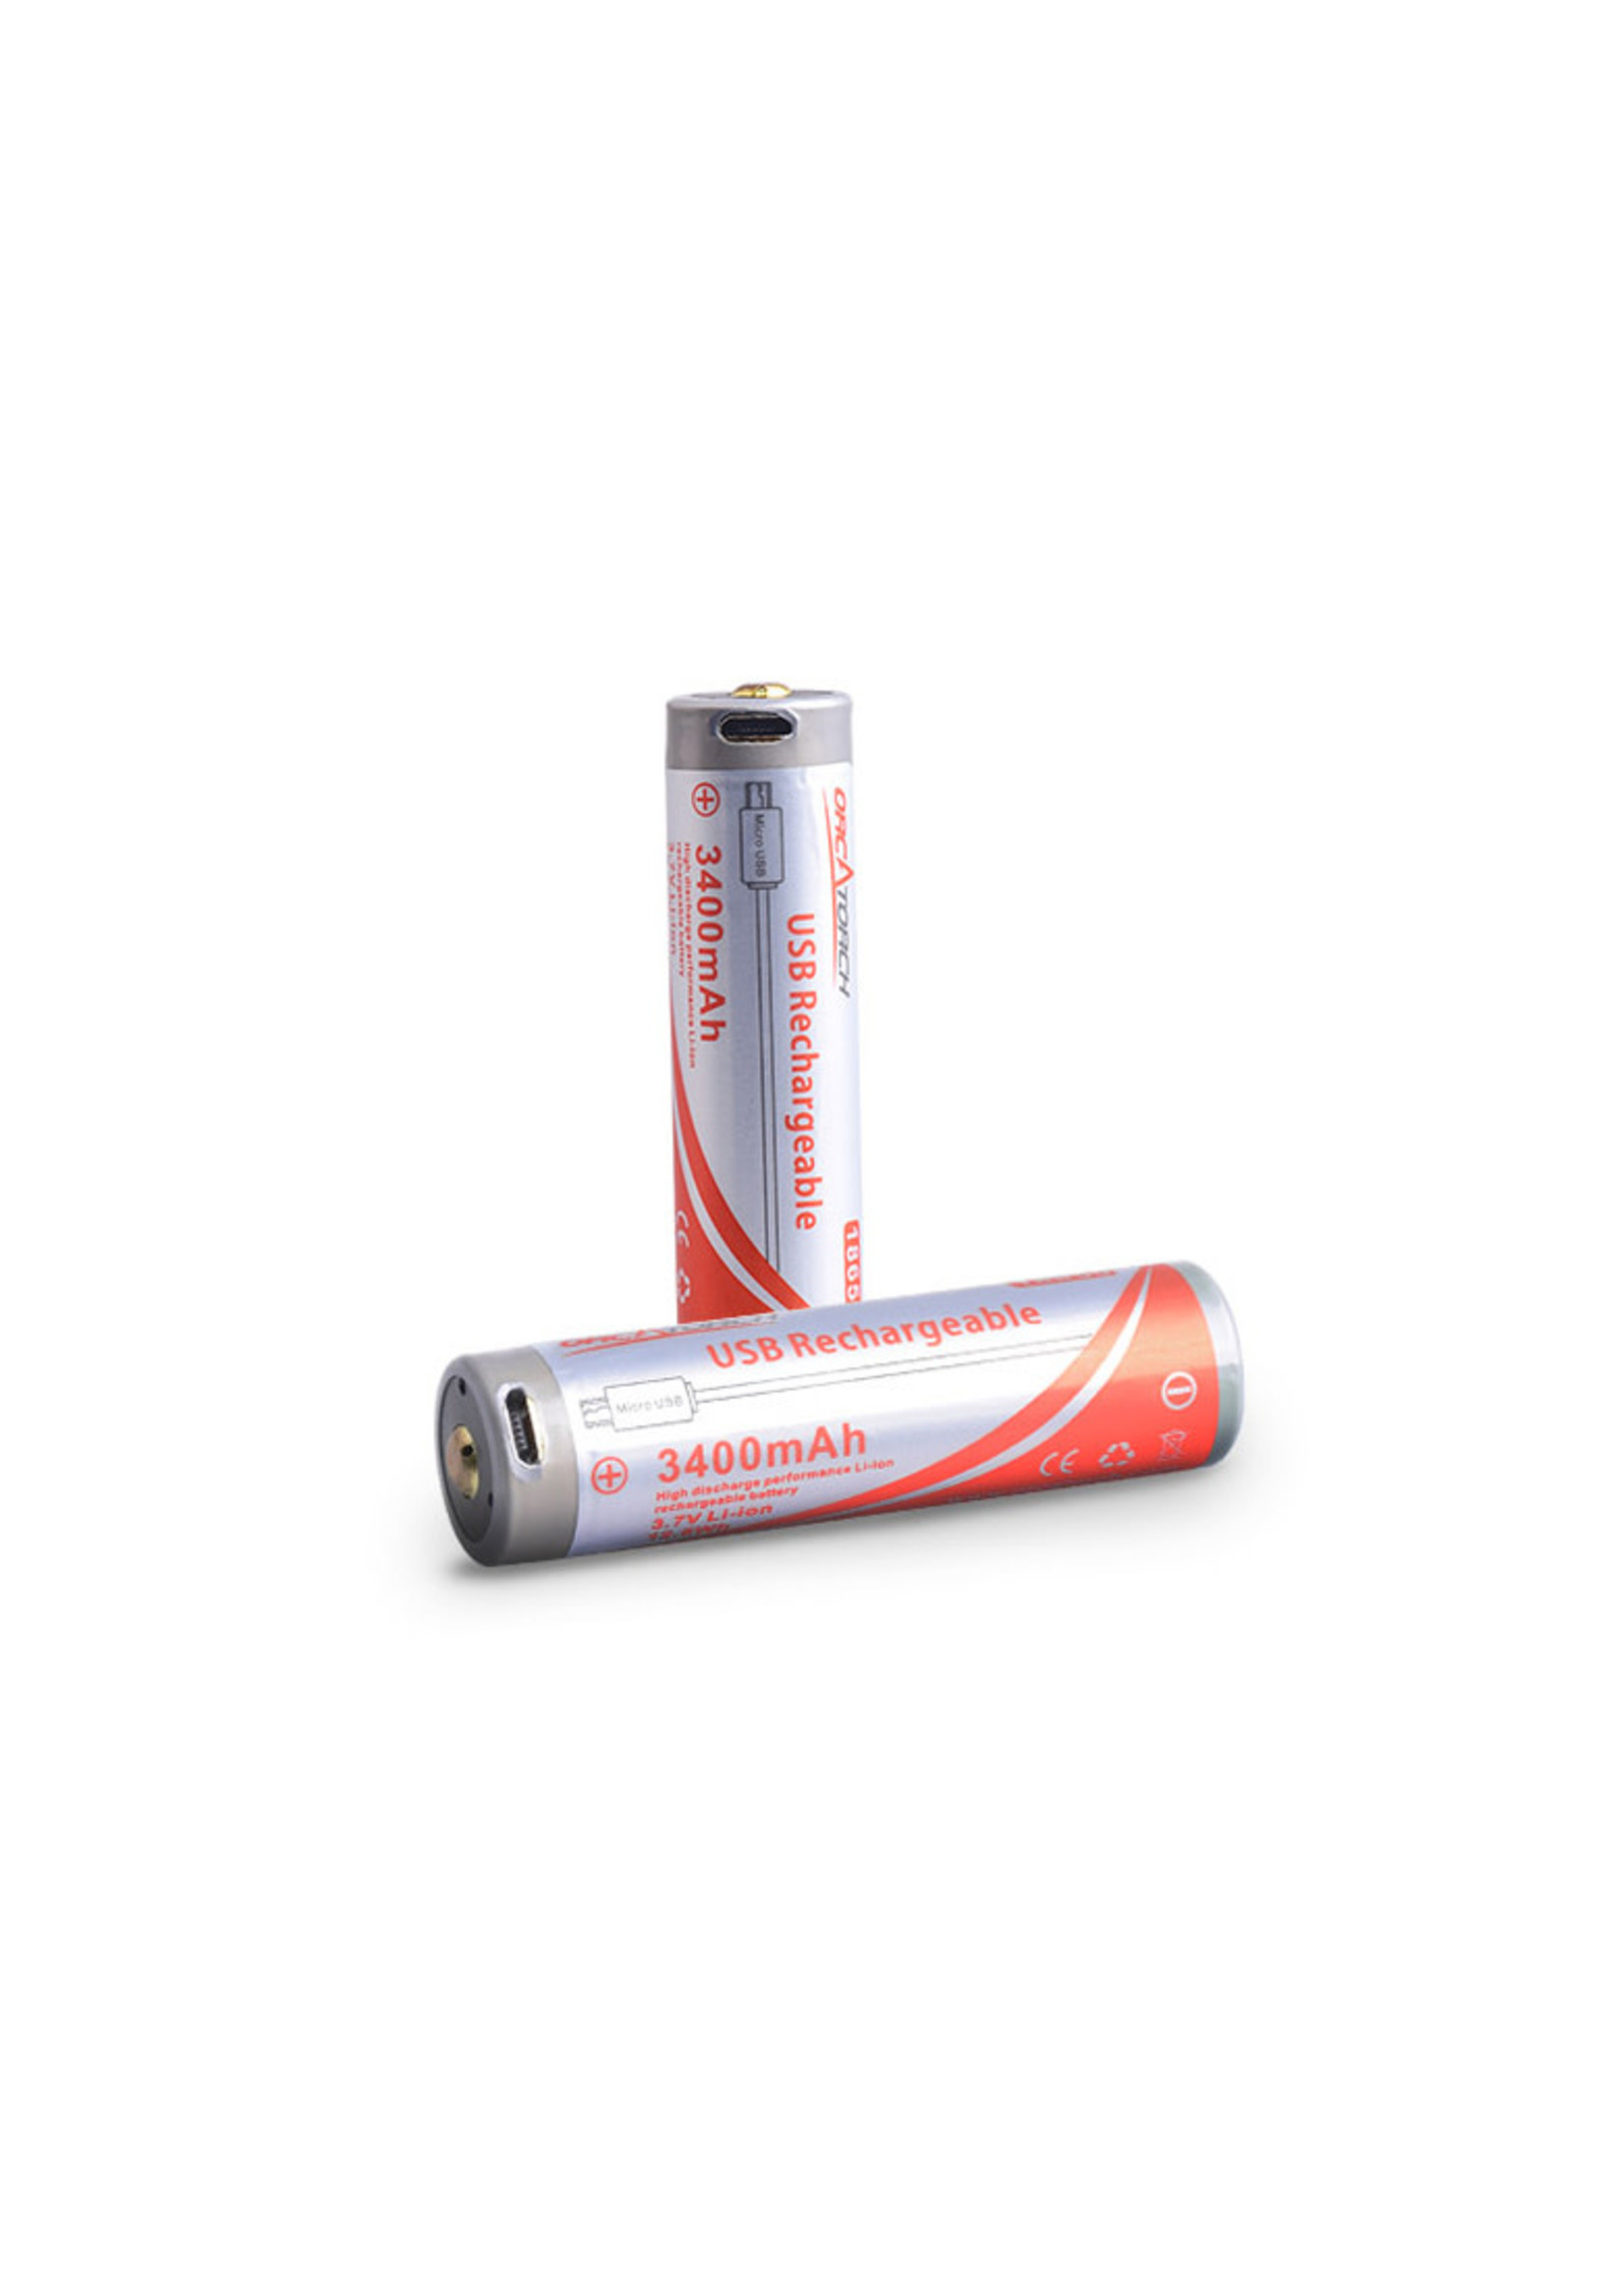 OrcaTorch OrcaTorch 18650 USB-Rechargeable Battery